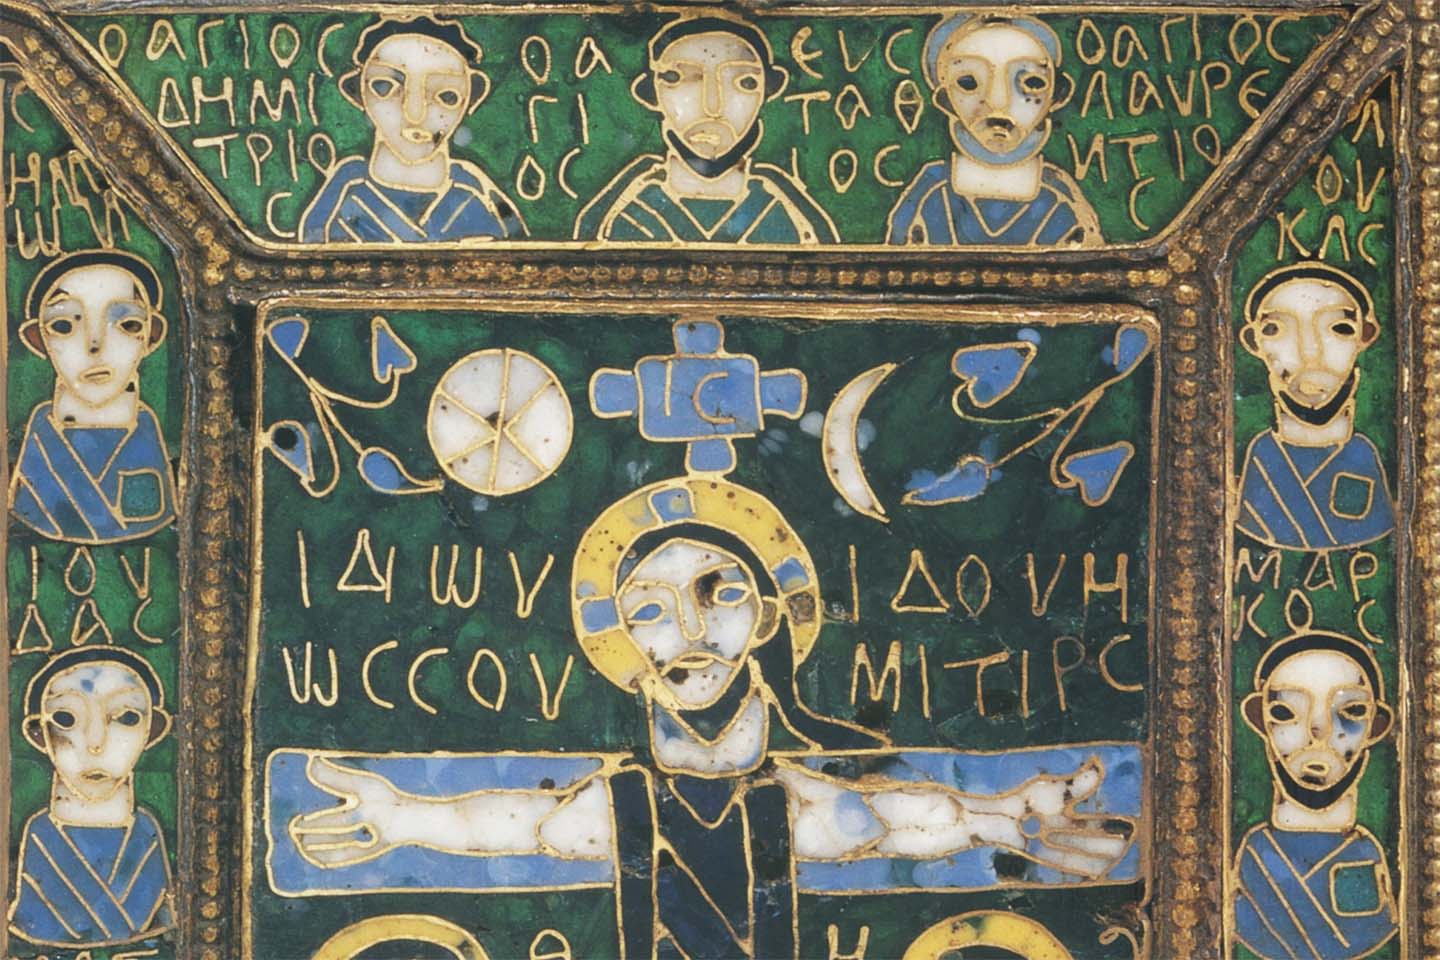 Green and blue Byzantine enamel object with Jesus on the cross surrounded by the apostles